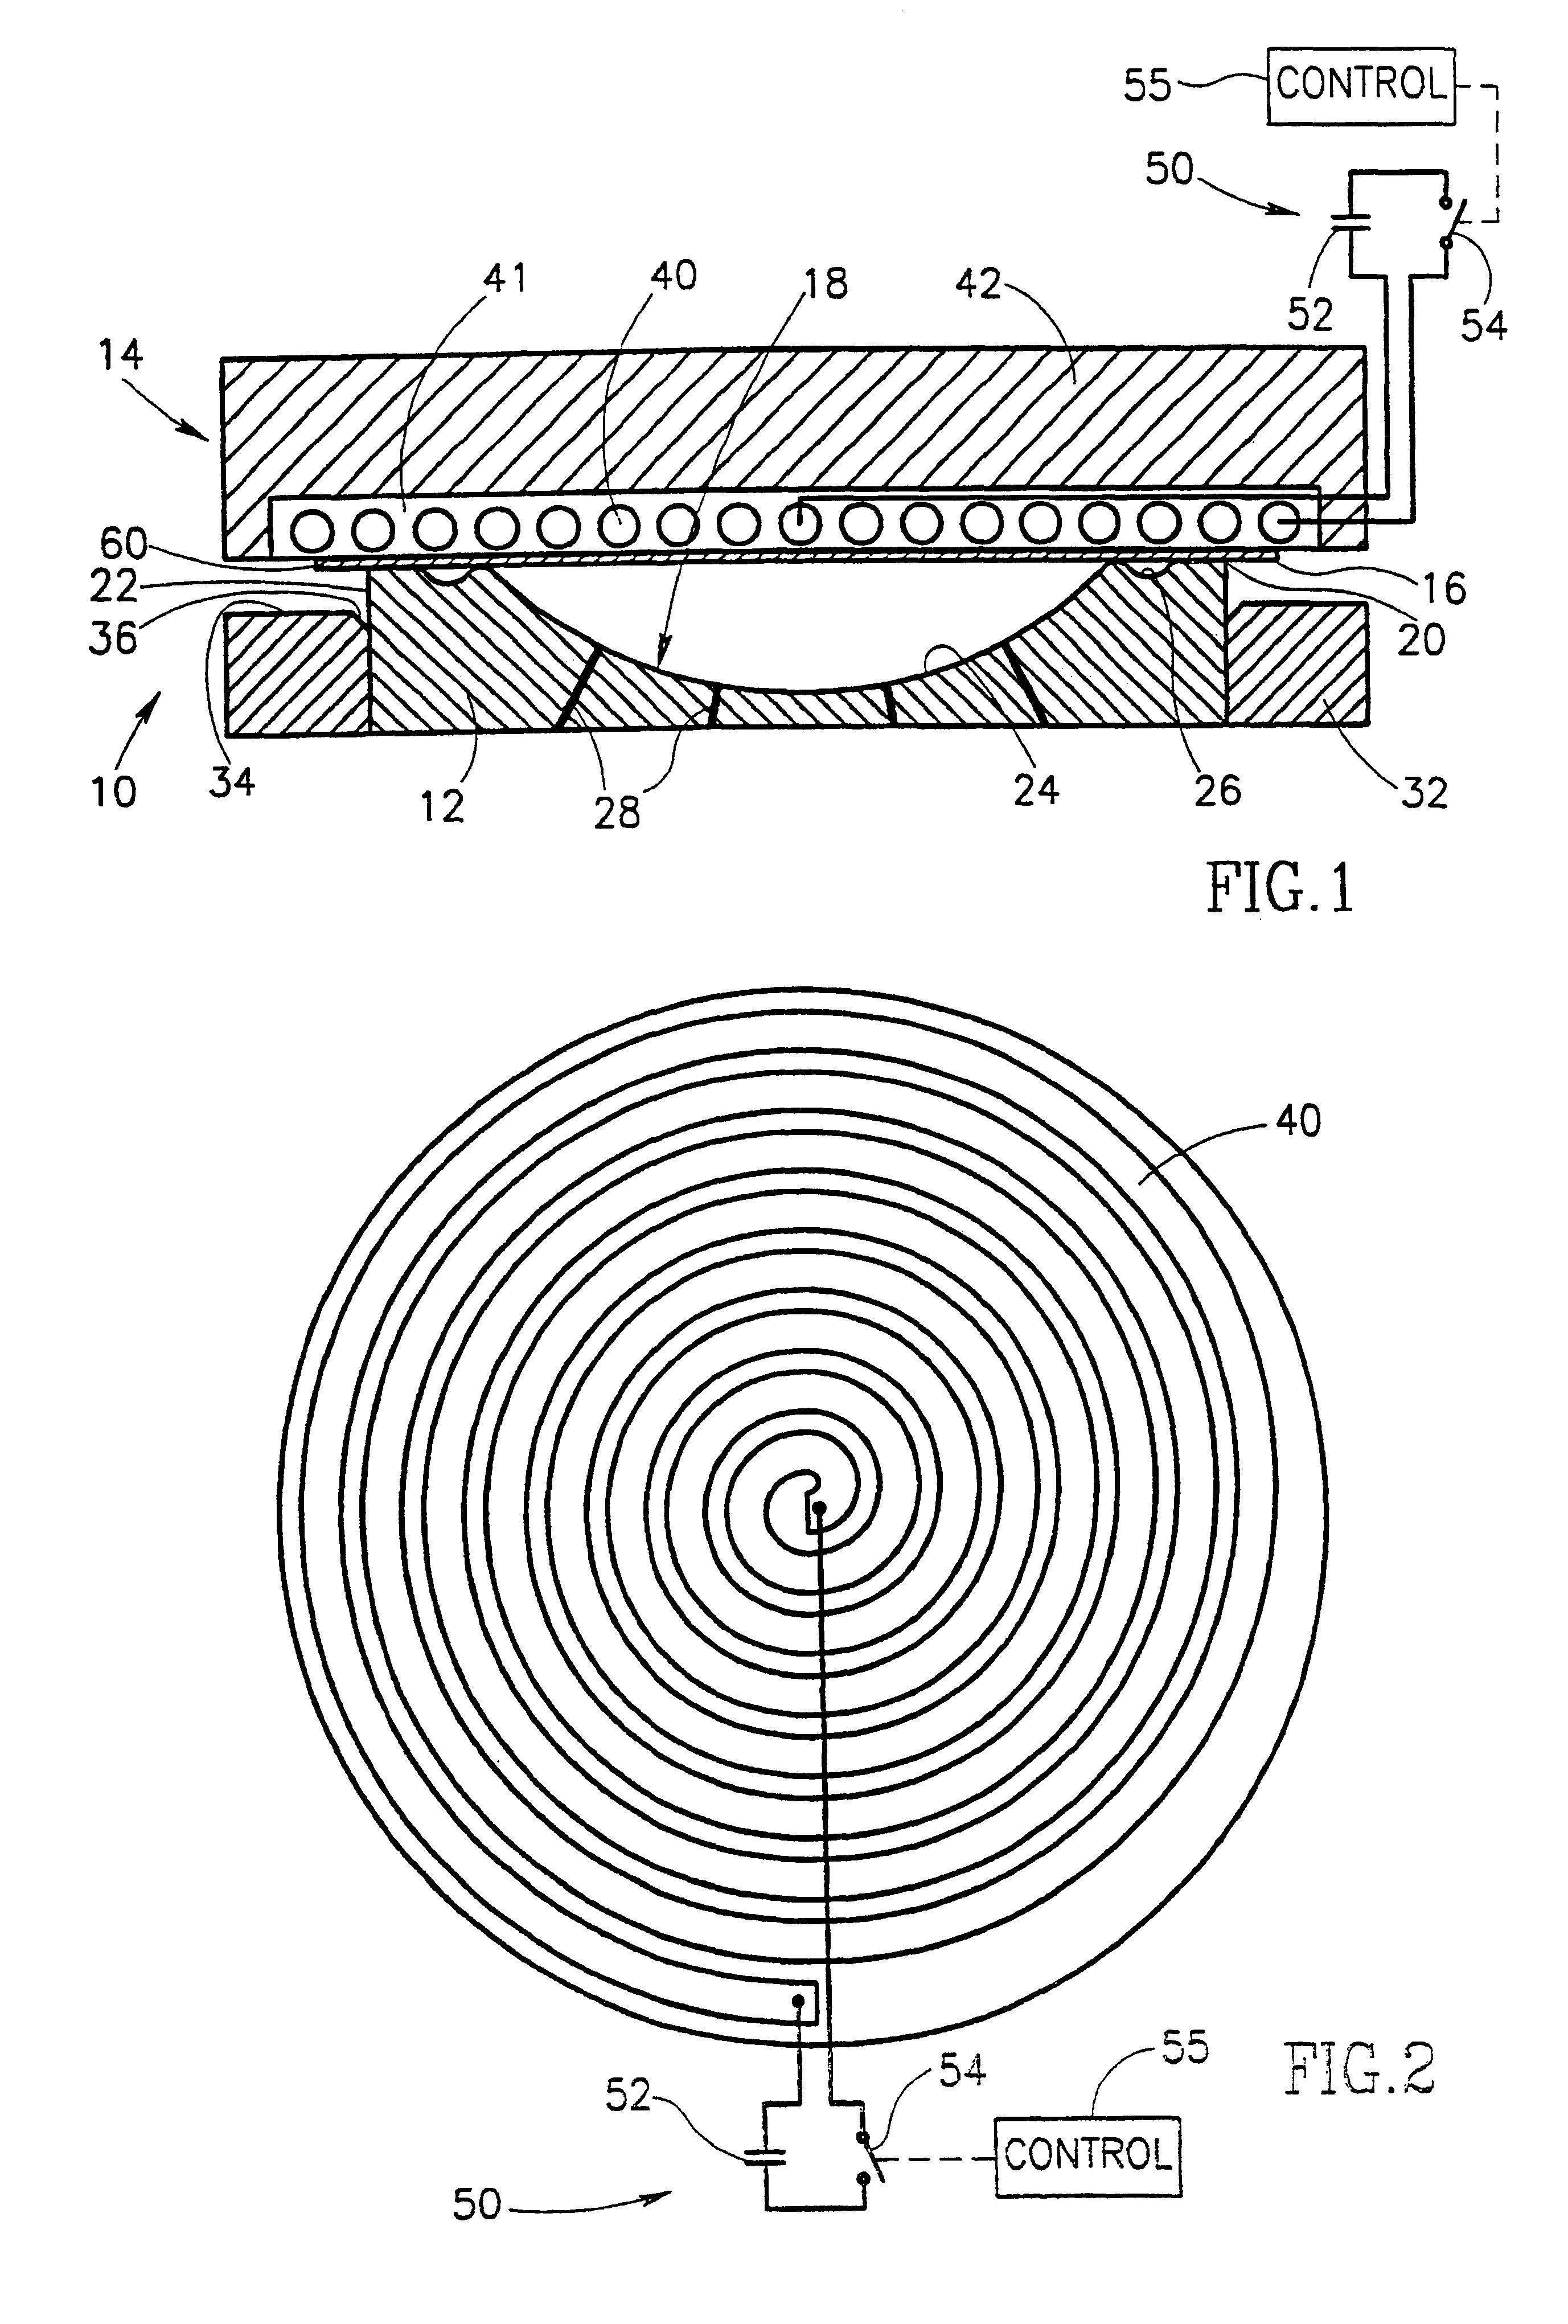 Apparatus and method for pulsed magnetic forming of a dish from a planar plate